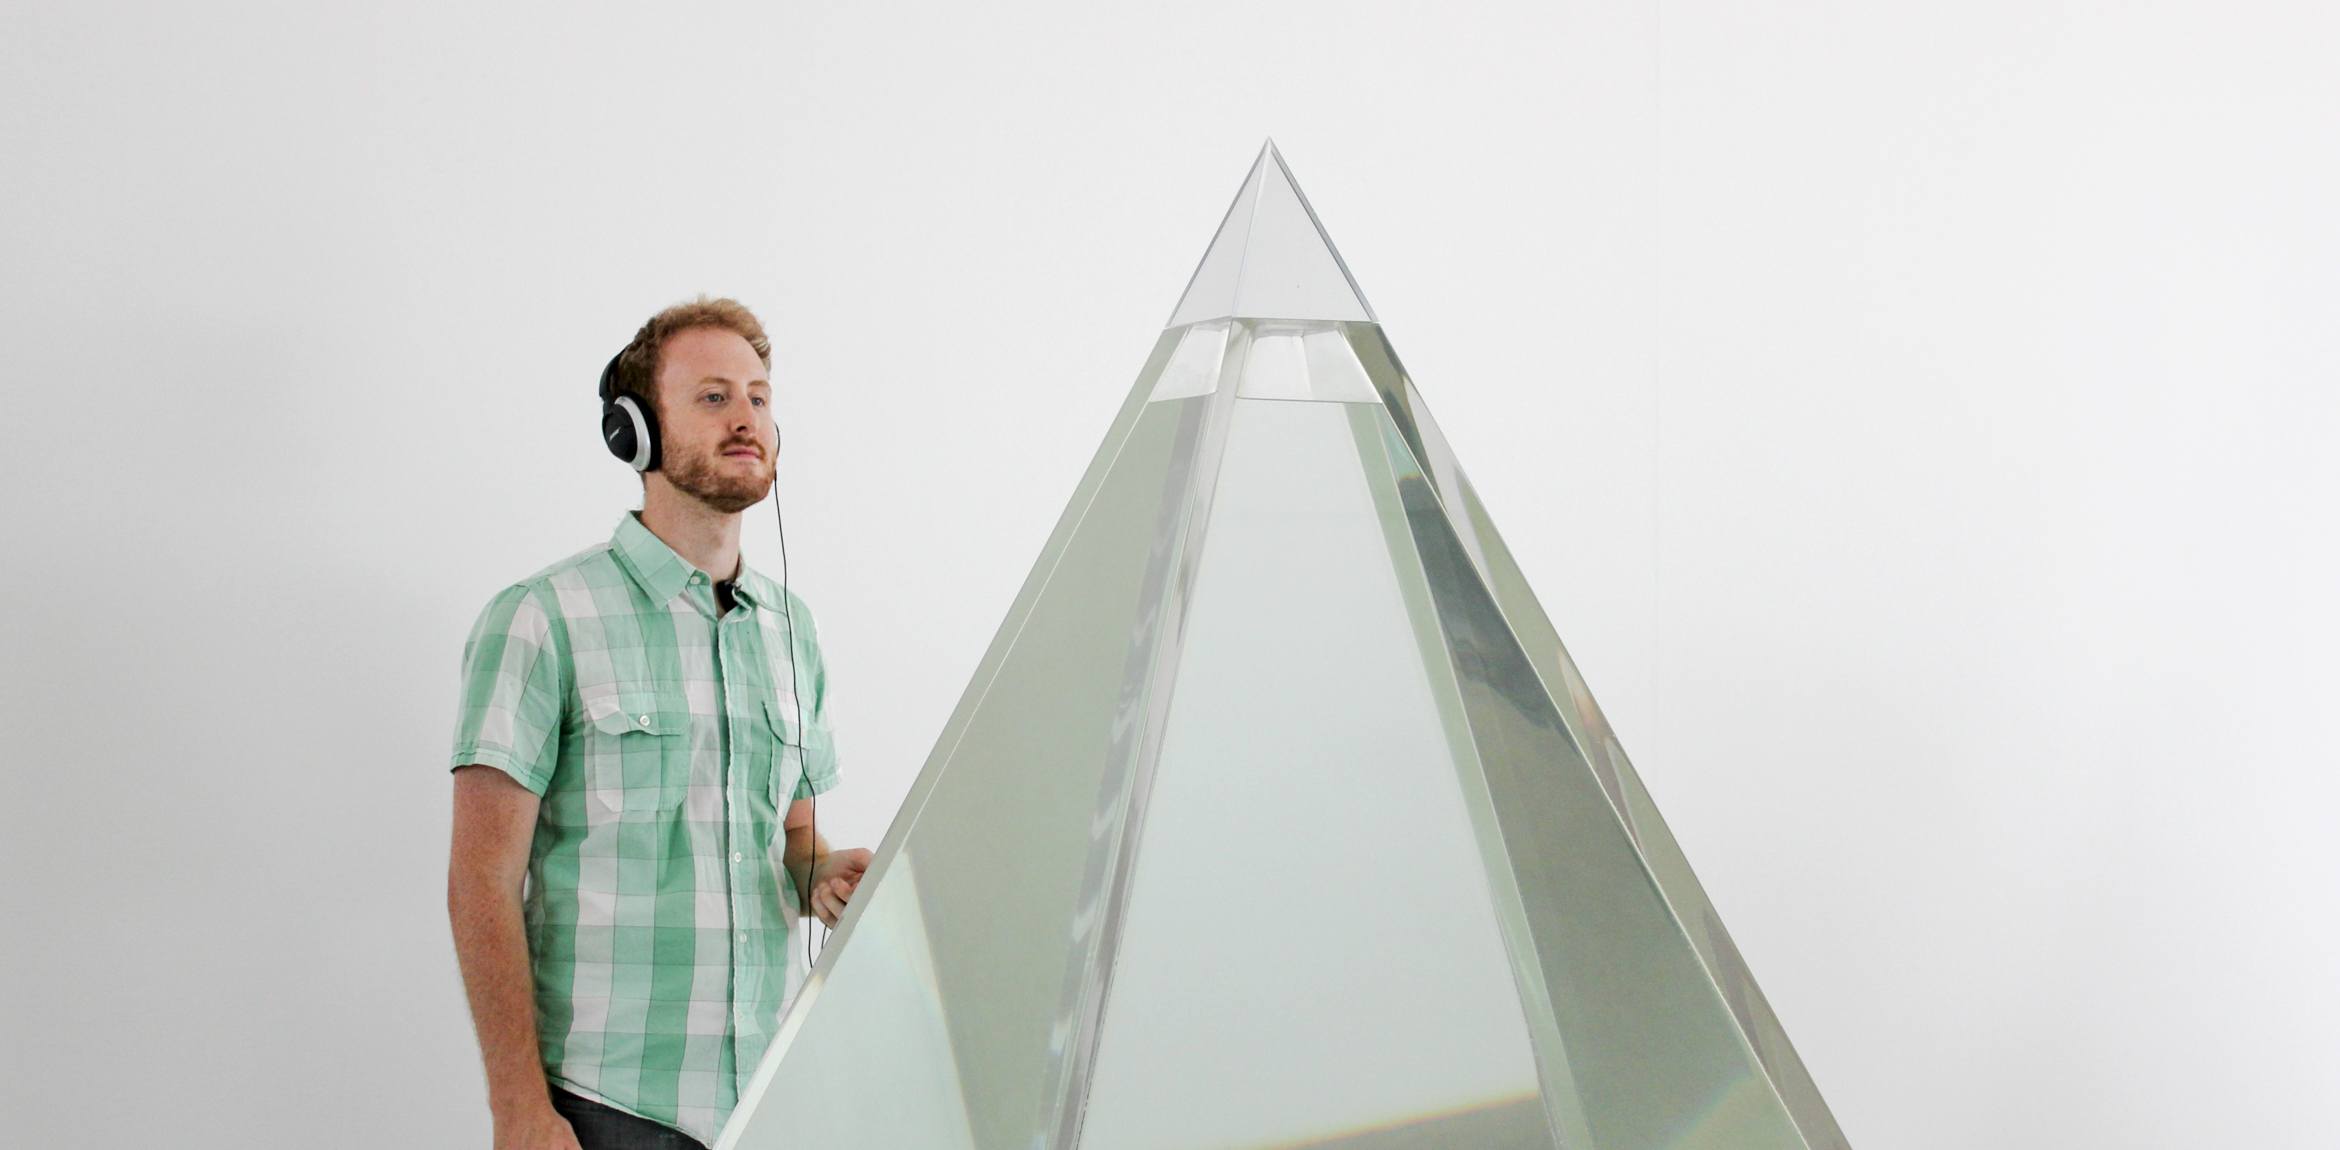 Guest stands behind a large translucent pyramids wearing headphones.